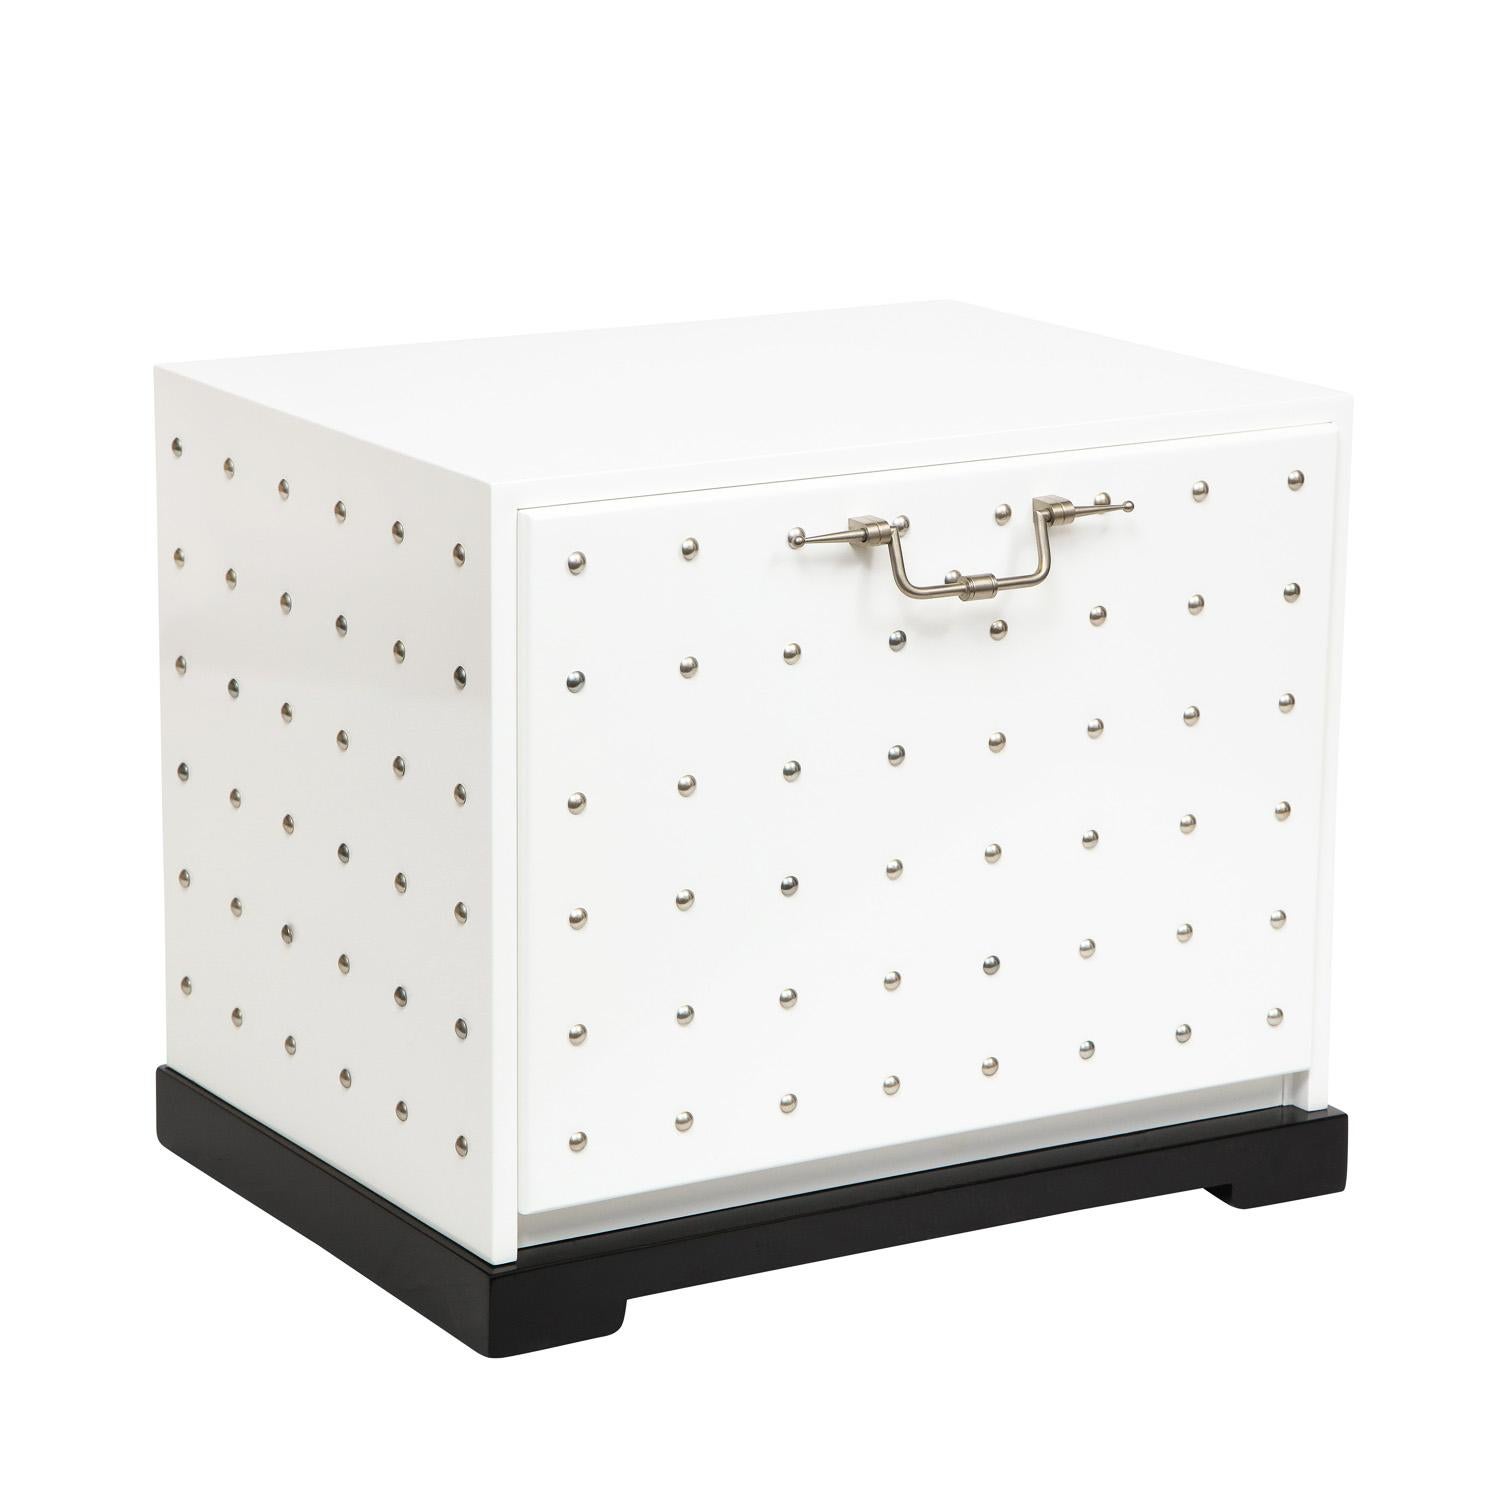 Stunning rare side table/chest model 223 in white lacquer with chrome studs and pull by Tommi Parzinger for Parzinger Originals, American 1960's (Signed “Parzinger Originals” on inside of drawer). This piece has been newly relacquered by Lobel